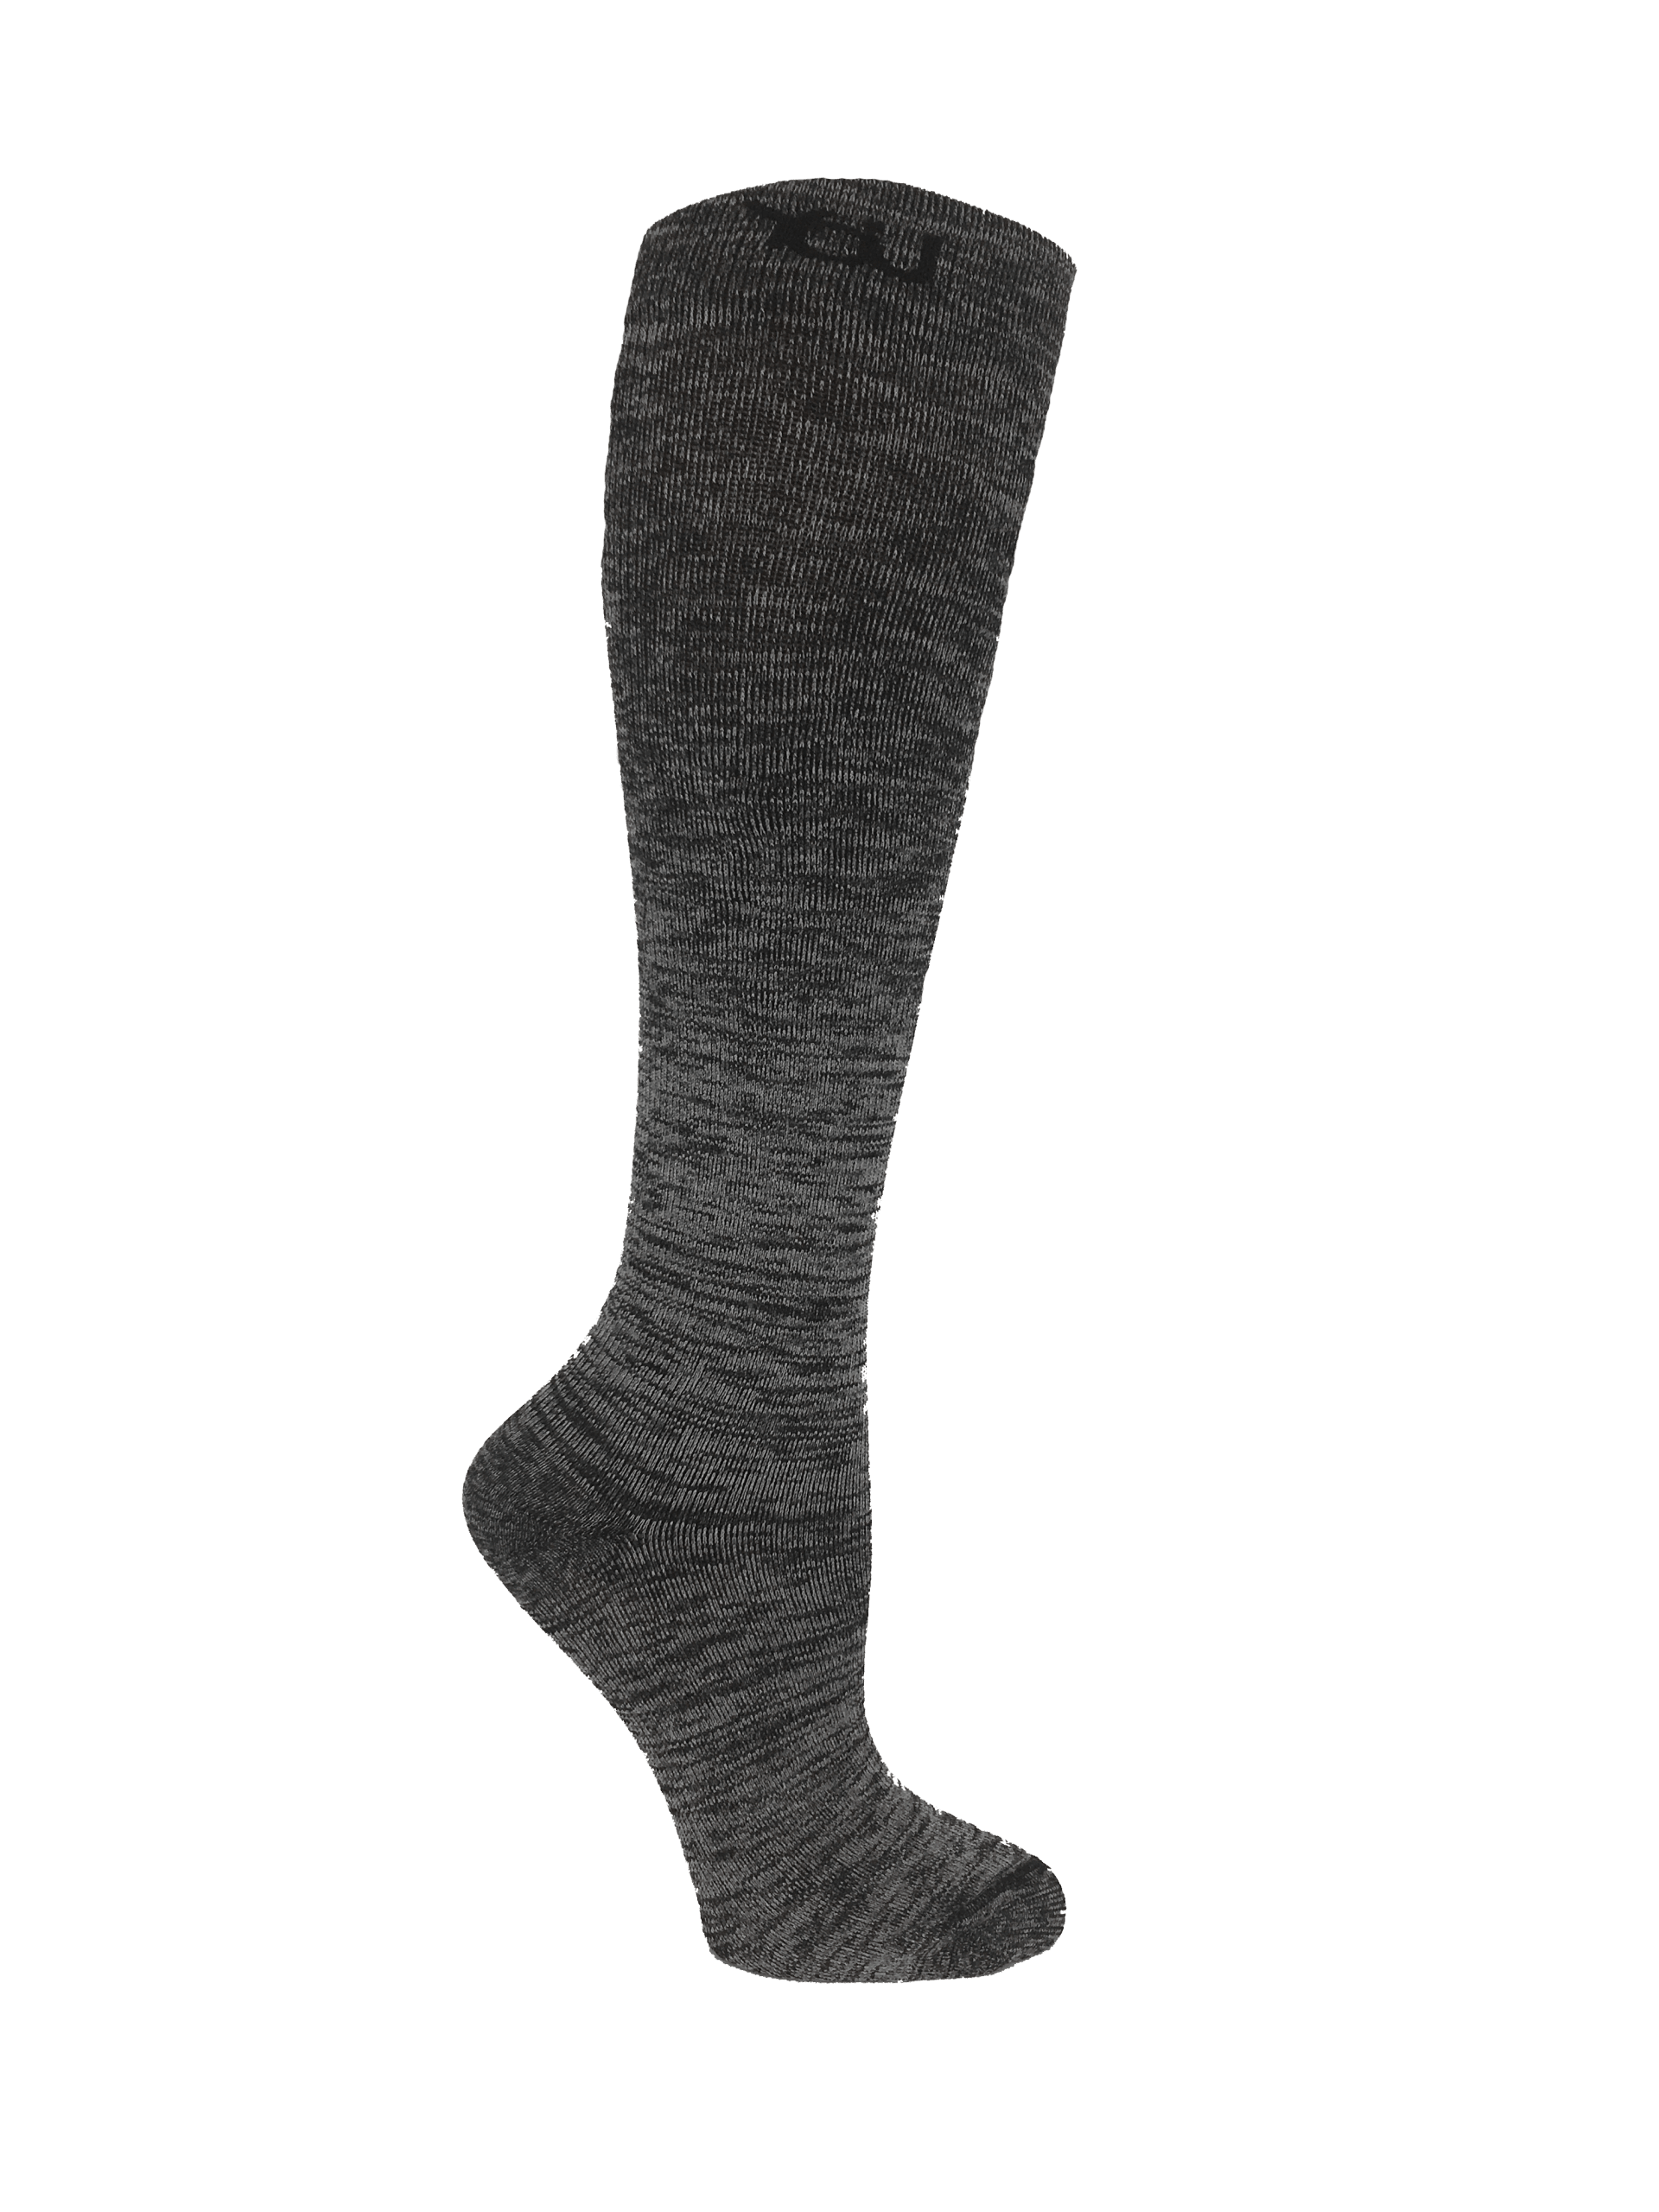 High Compression Socks 30-40 mmHg - Knee High - 813K98-SGMC High Compression Socks 30-40 mmHg - Knee High - undefined by Supply Physical Therapy 30-40 mmHg, Compression socks